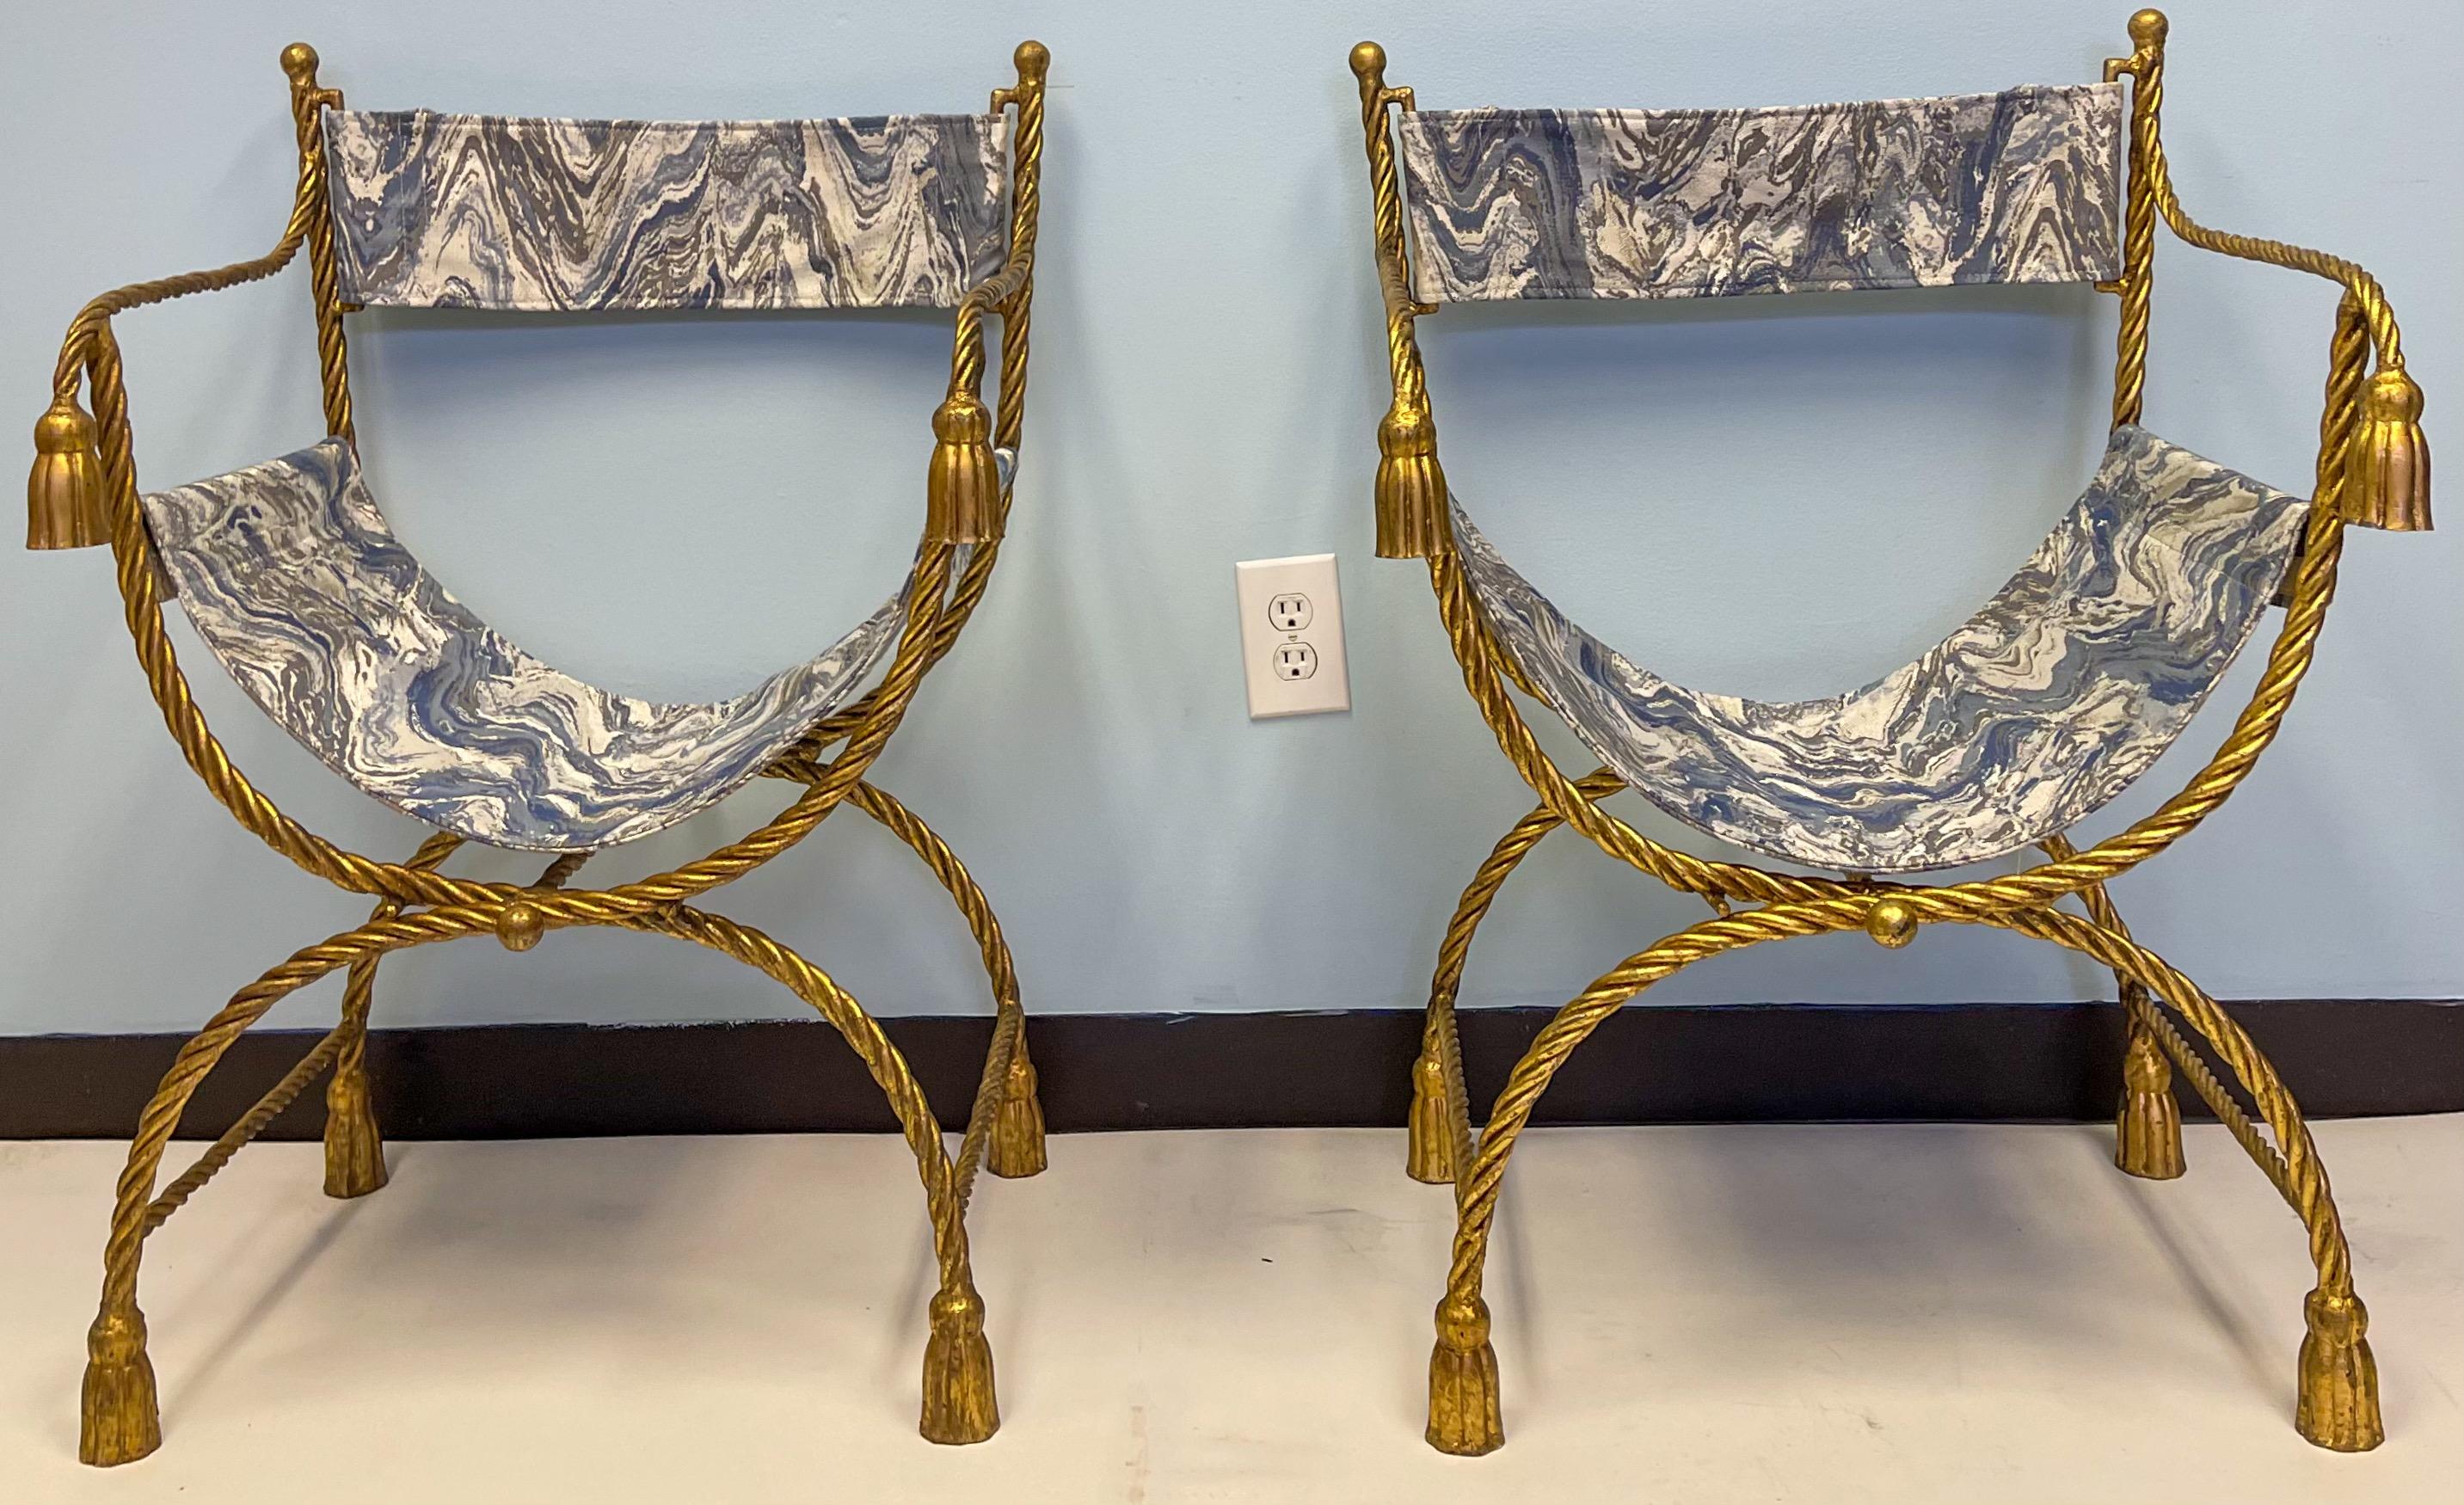 Italian Neo-Classical Style Gilt Tassel Savonarola / Campaign Chairs, Pair In Good Condition For Sale In Kennesaw, GA